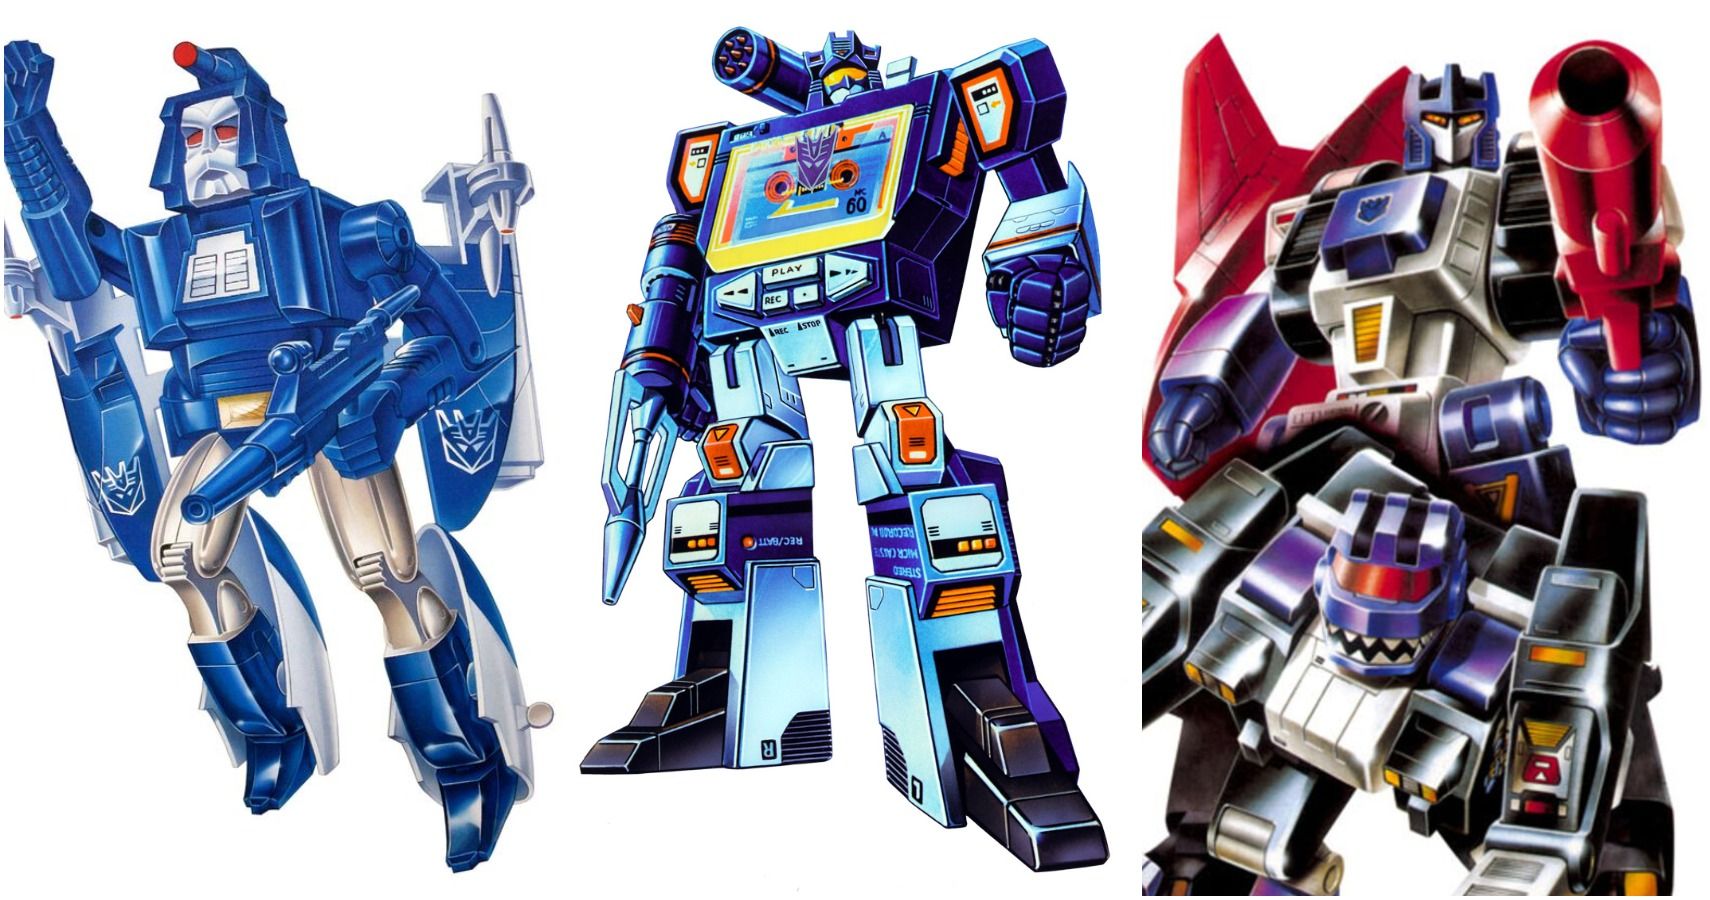 coolest looking transformers